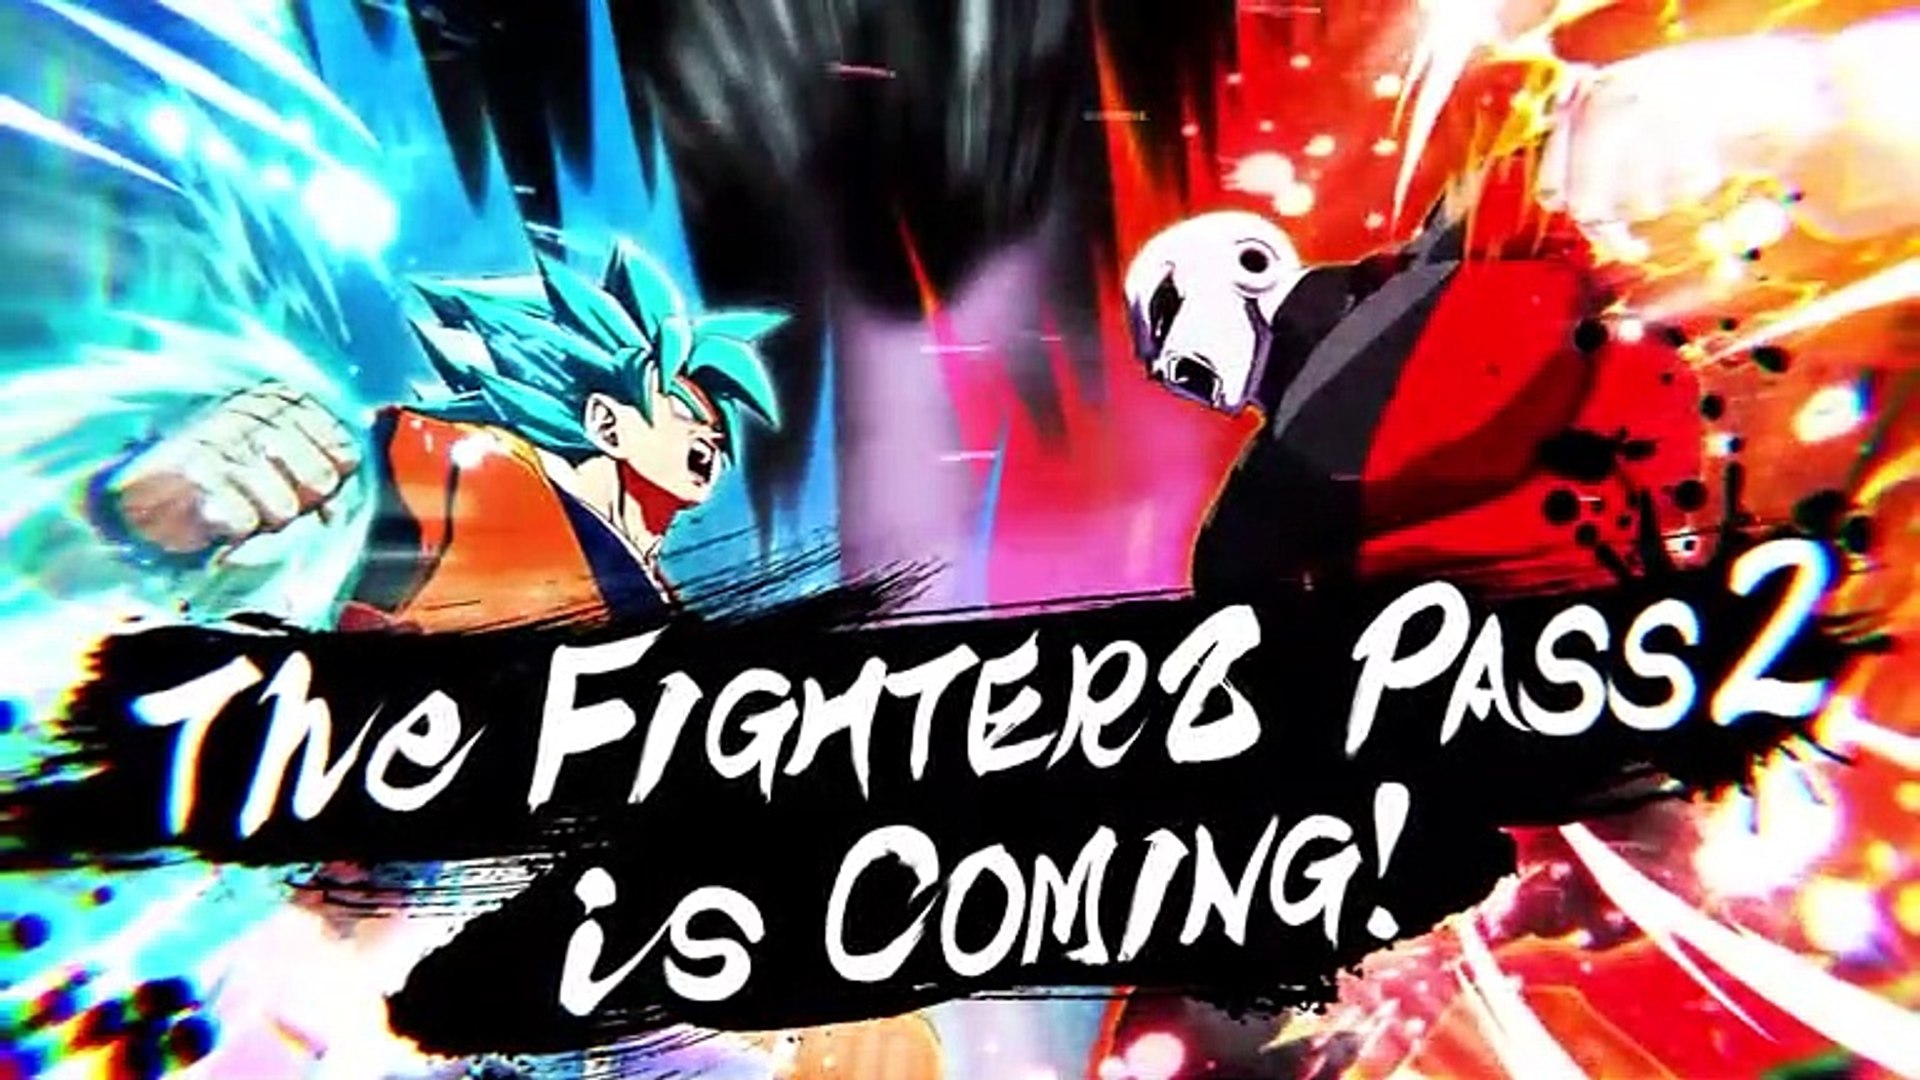 DRAGON BALL FighterZ - FighterZ Pass 2 Announcement Trailer | PS4, X1, PC,  SWITCH - video Dailymotion